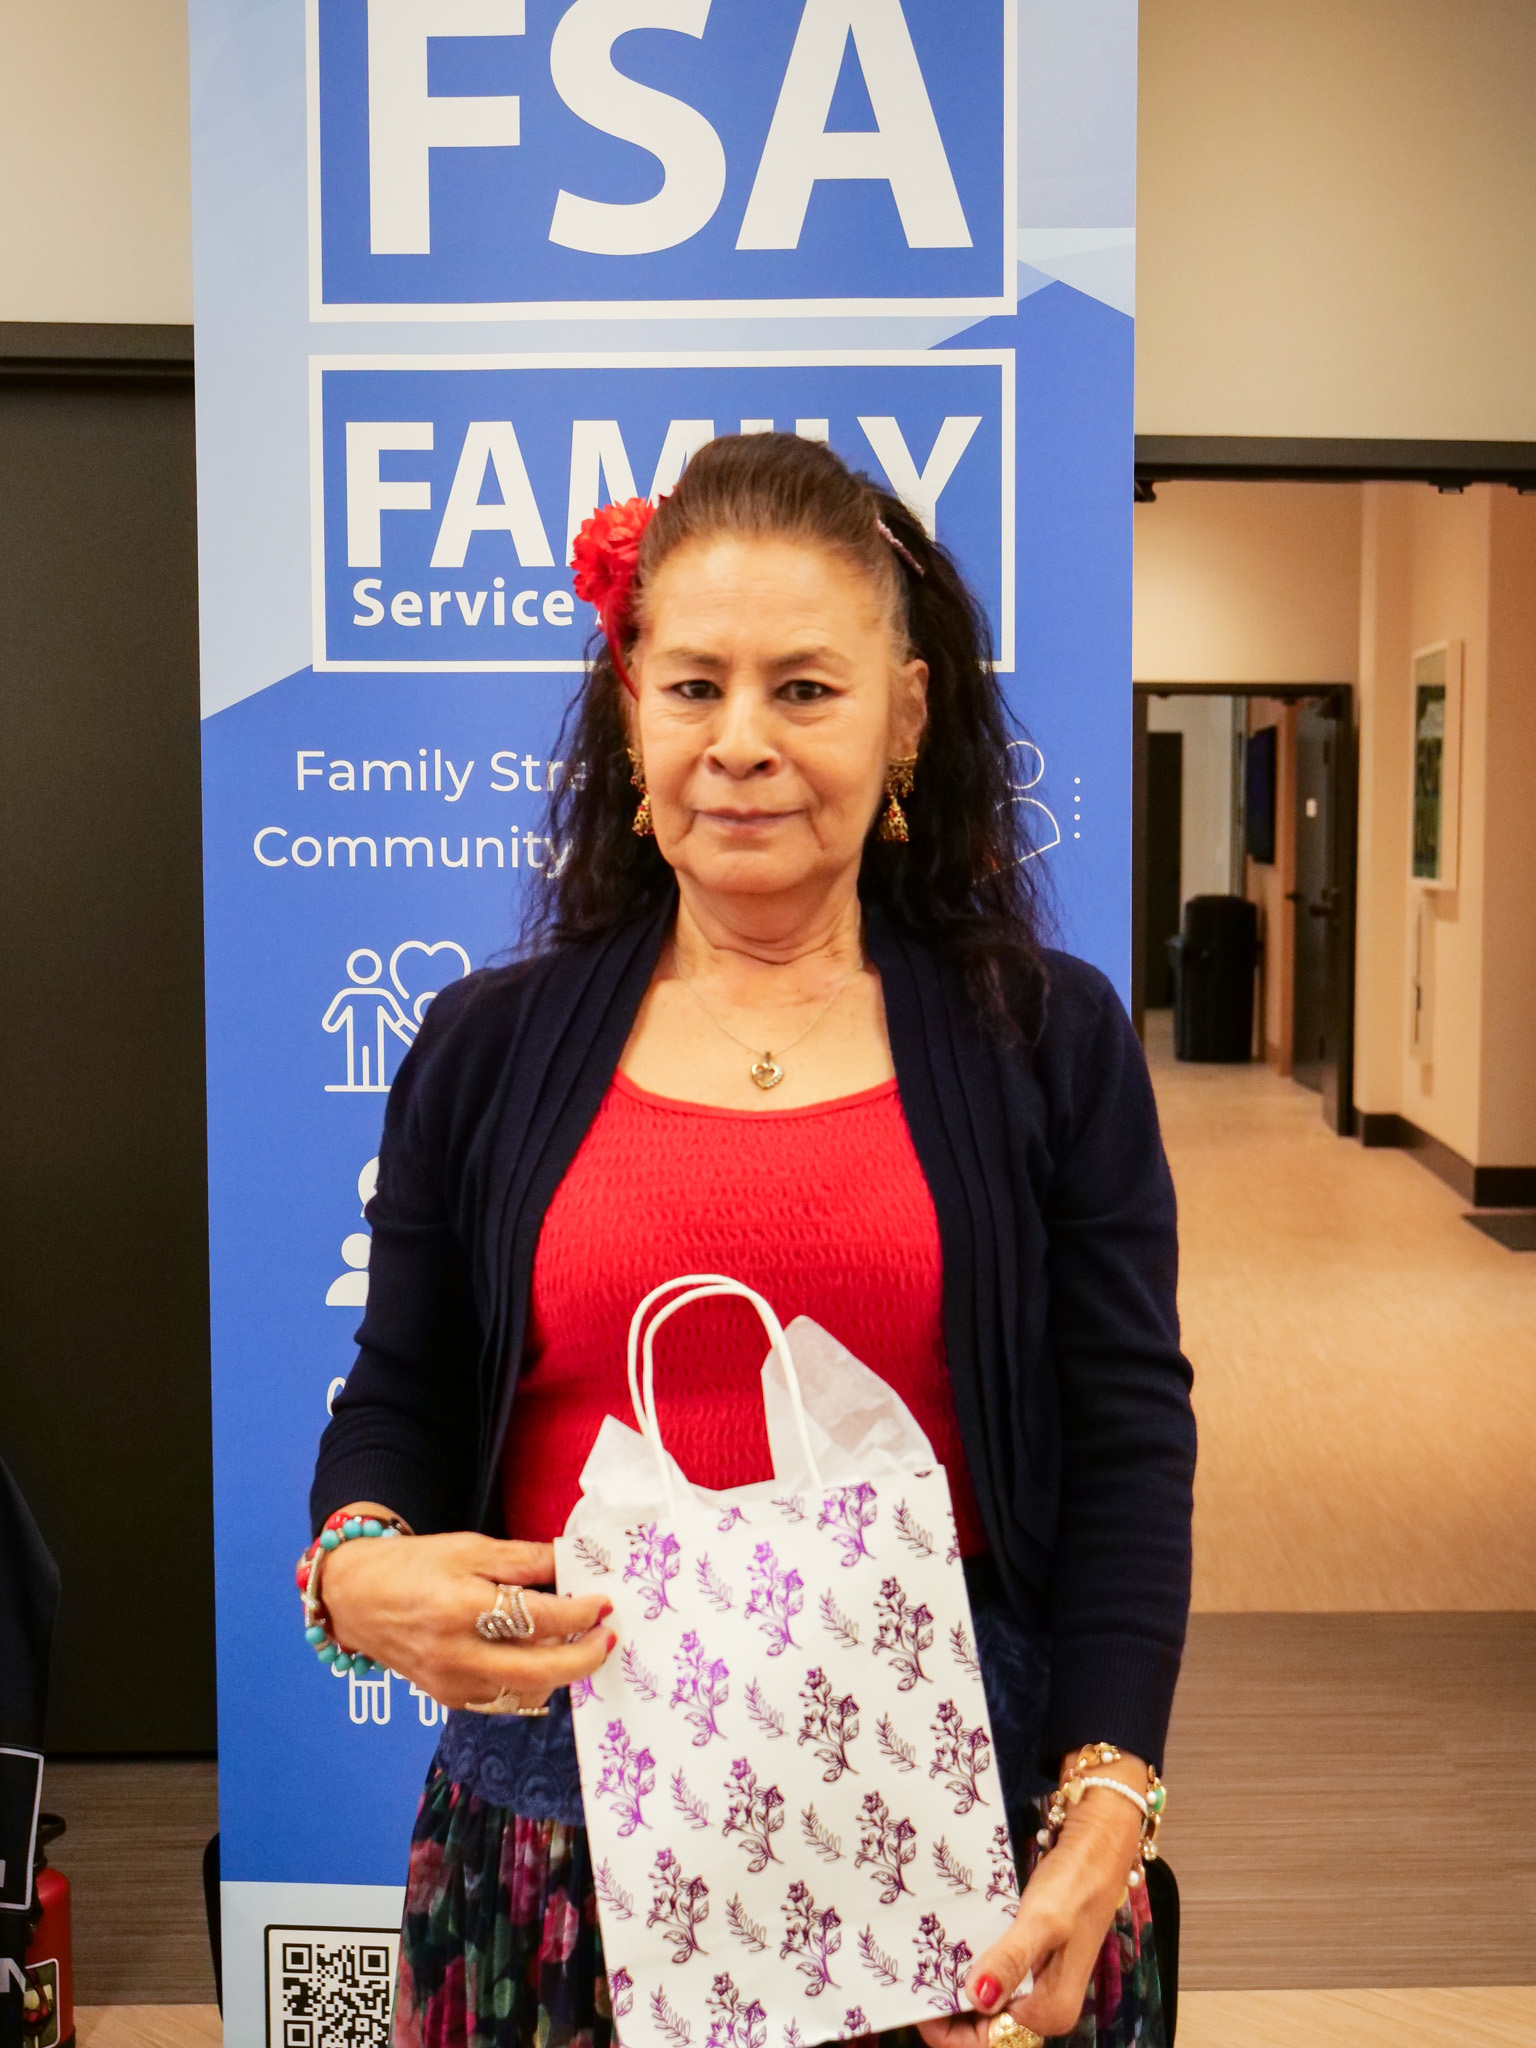 Older adult woman with dark hair, a red flower in her hair and red shirt with black cardigan holding gift bag in front of a sign for the Family Services Association